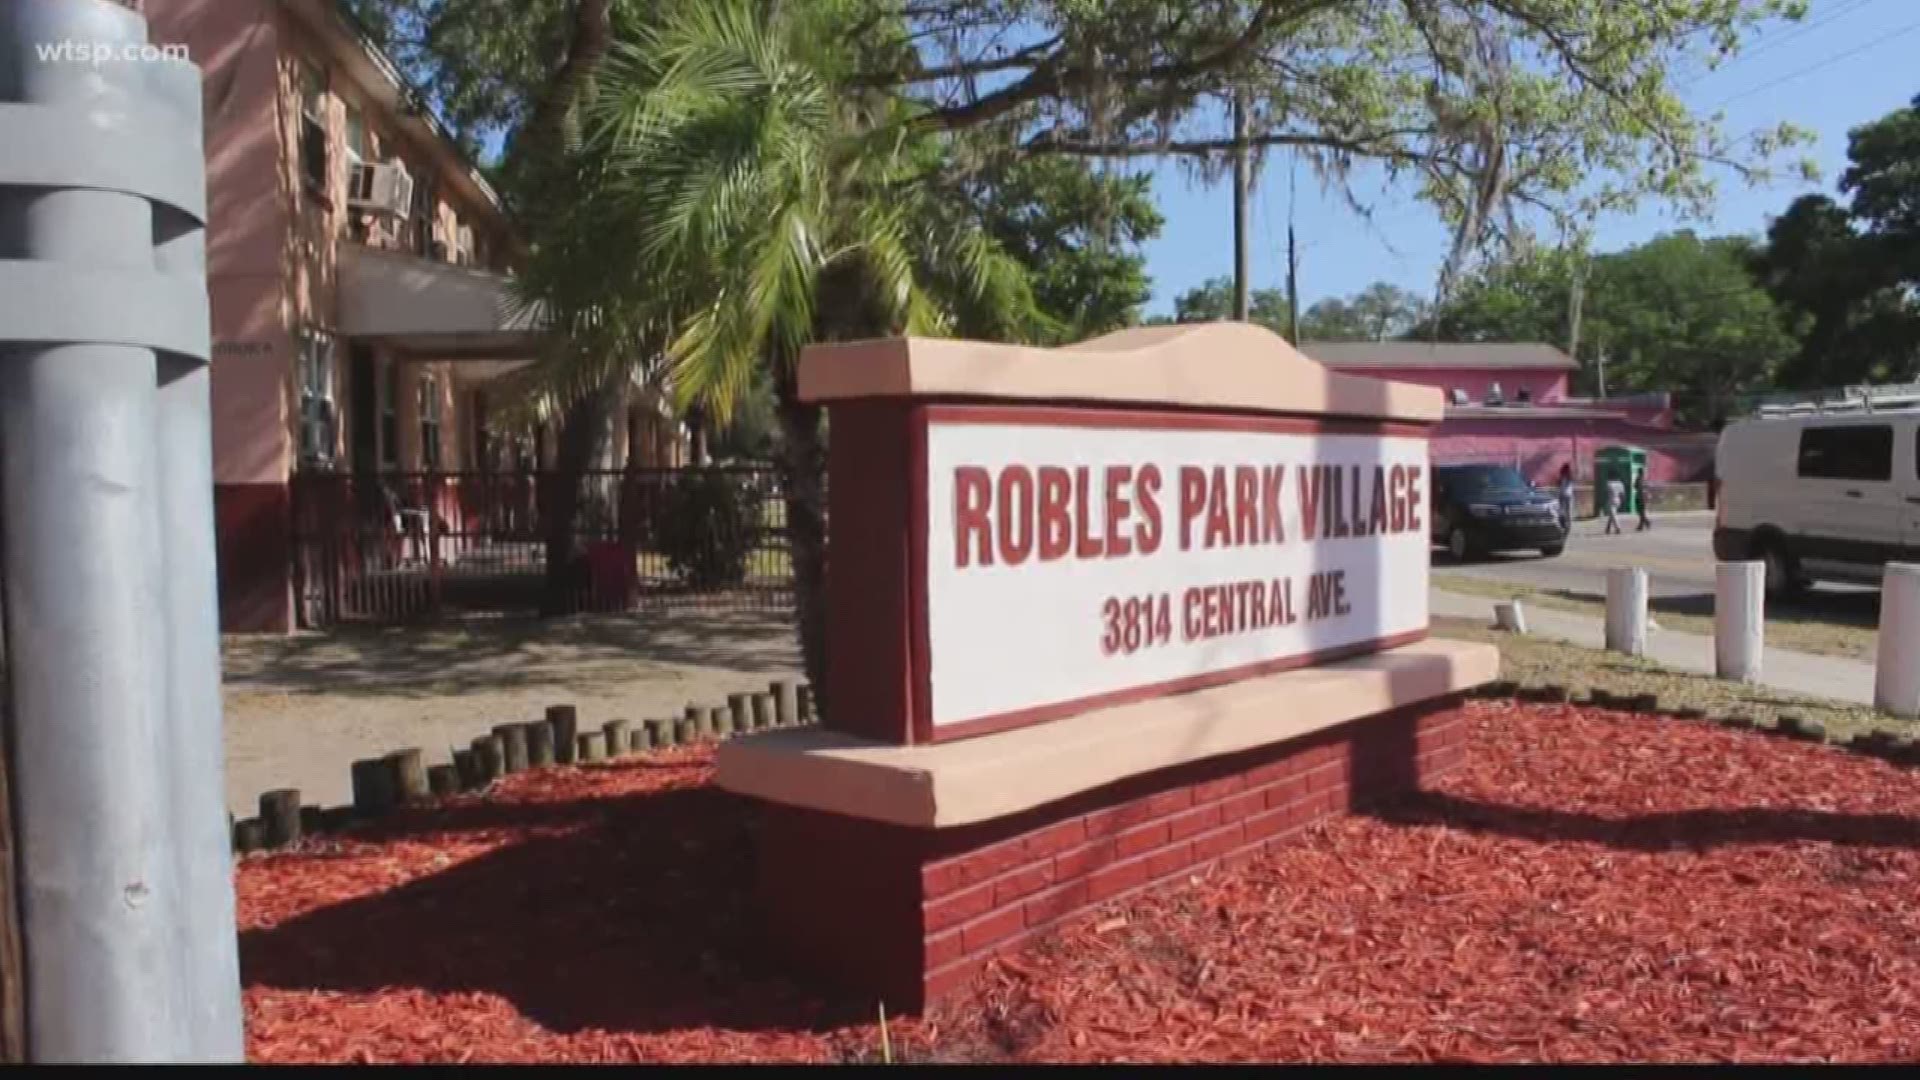 They lived on top of a cemetery for years and didn't know it.

Today, the truth haunts.

Neighbors in Robles Park Village believe they have found a headstone from the city’s first Black cemetery, and the possible discovery is leading the Tampa Housing Authority to expand its investigation.